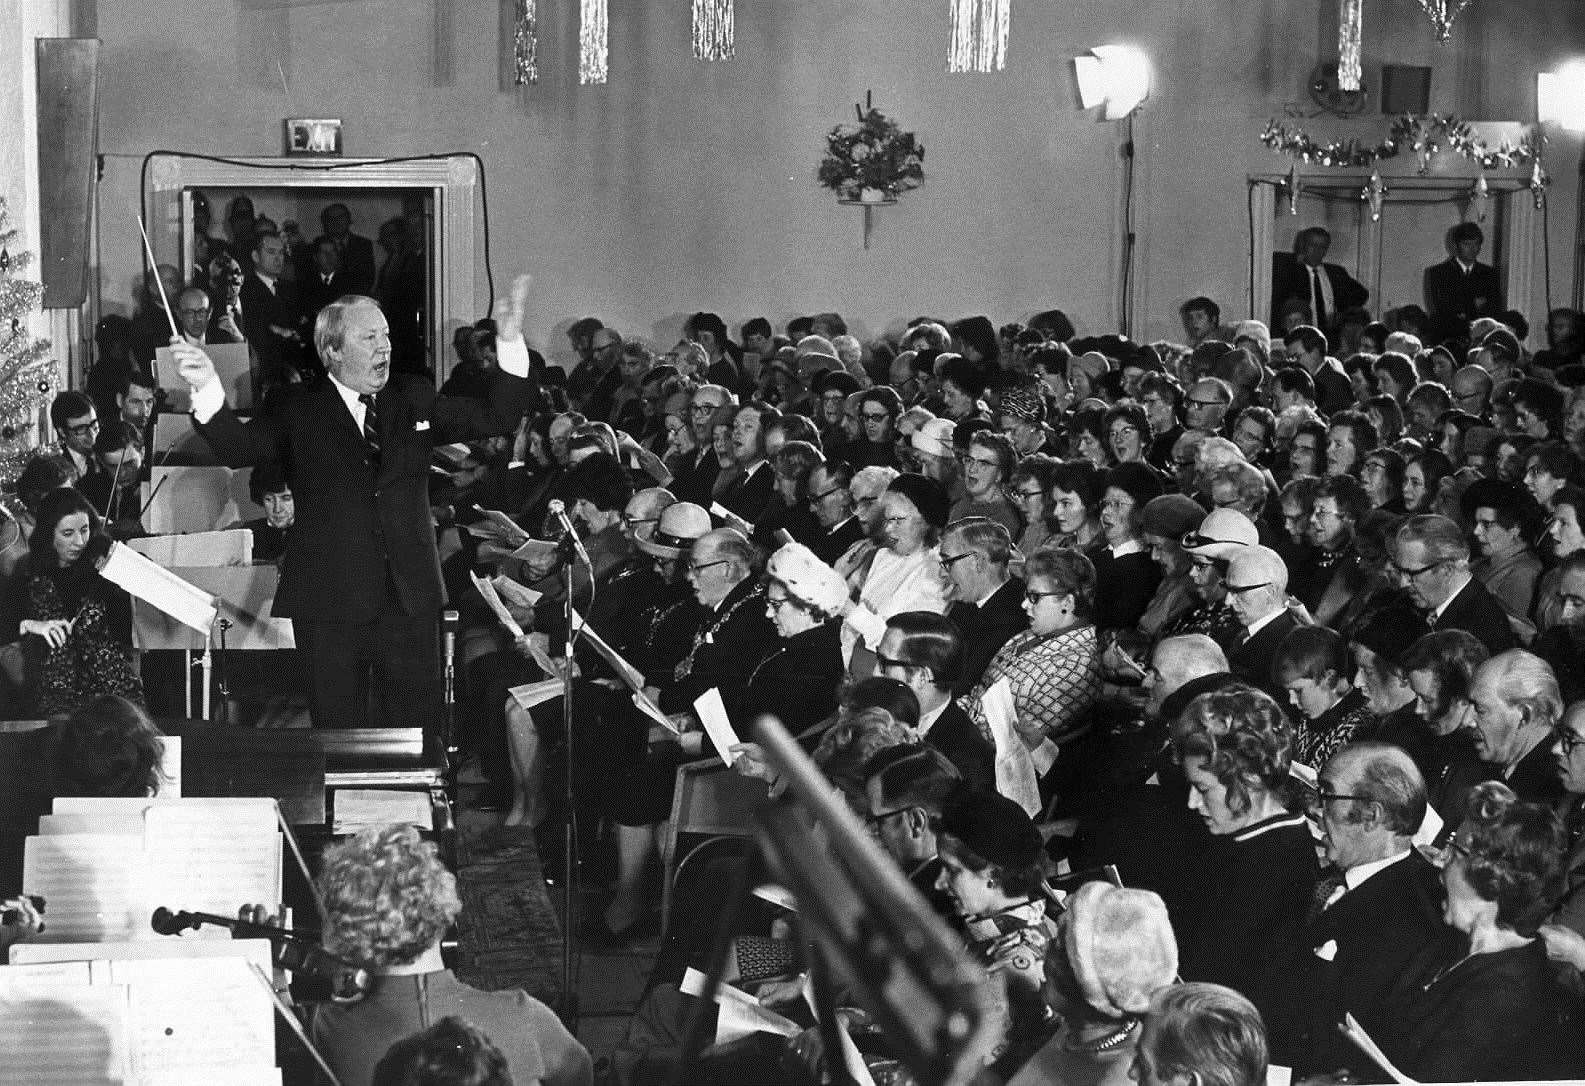 Prime Minister Ted Heath was back in Broadstairs to conduct another carol service in December 1972